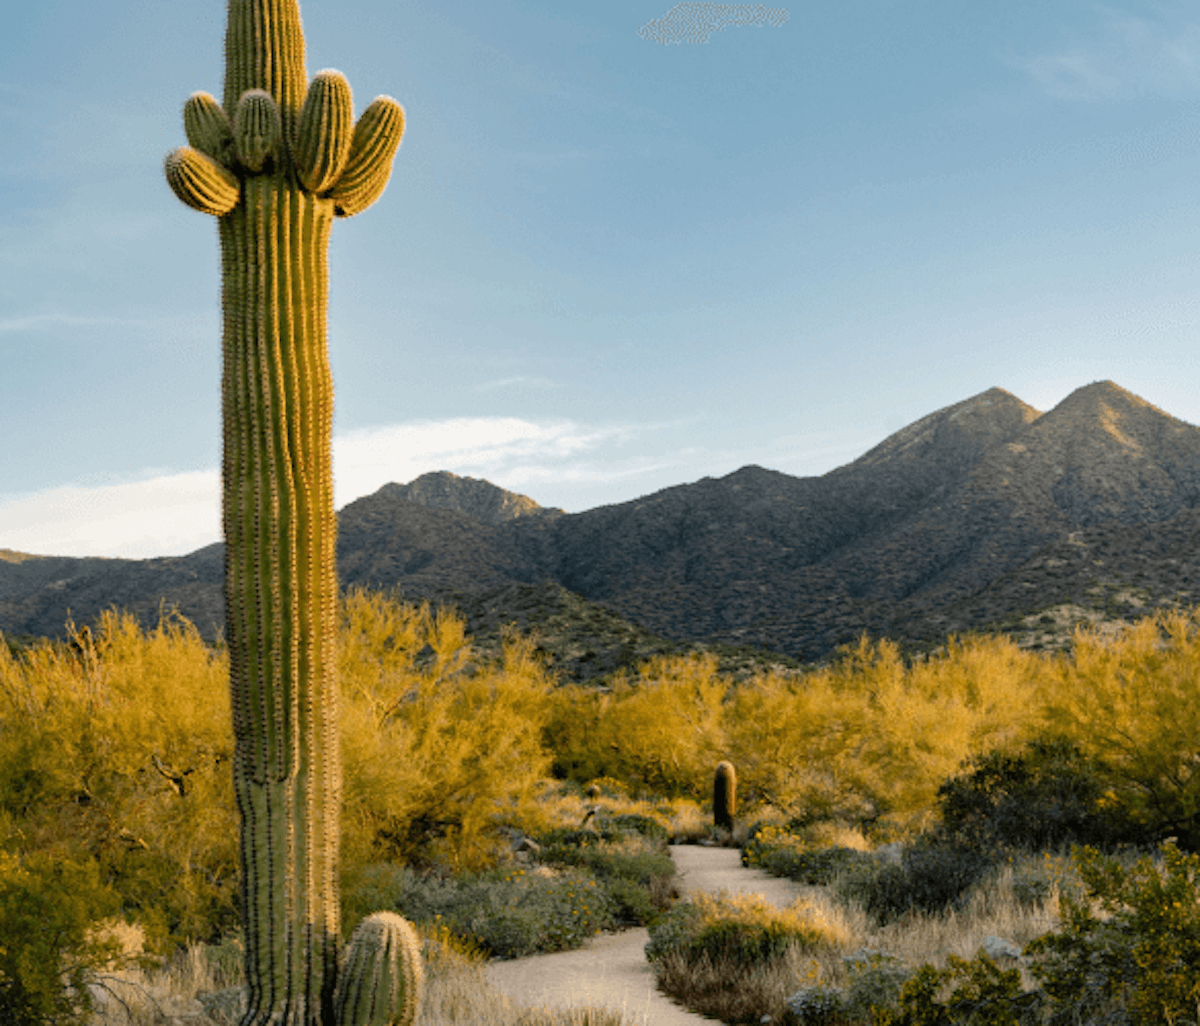 A towering saguaro cactus stands beside a trail leading through a desert landscape with mountains in the background.